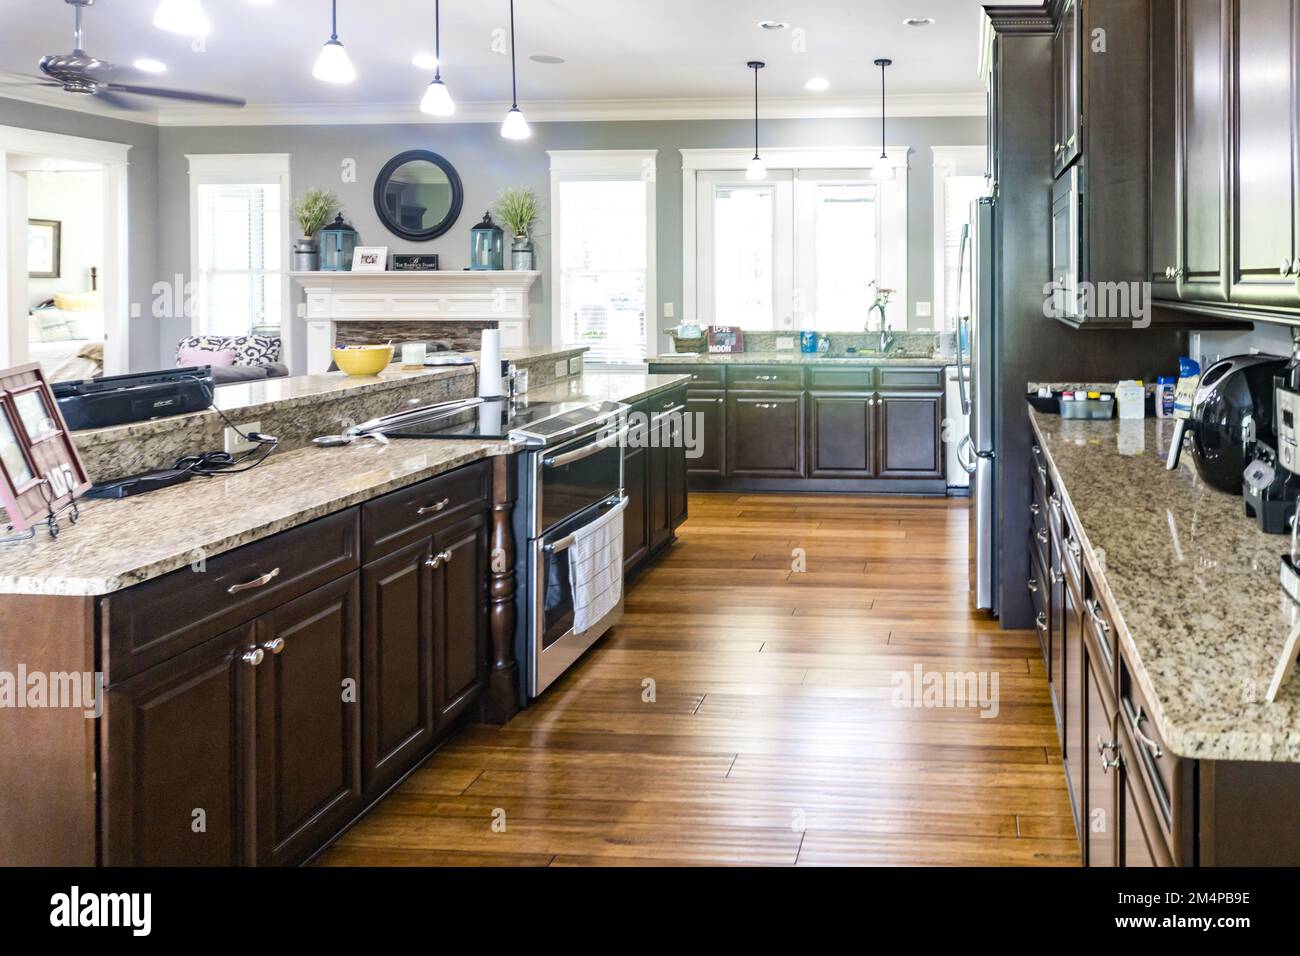 A new kitchen with dark wood cabinets, hardwood floors and stainless steel appliances Stock Photo